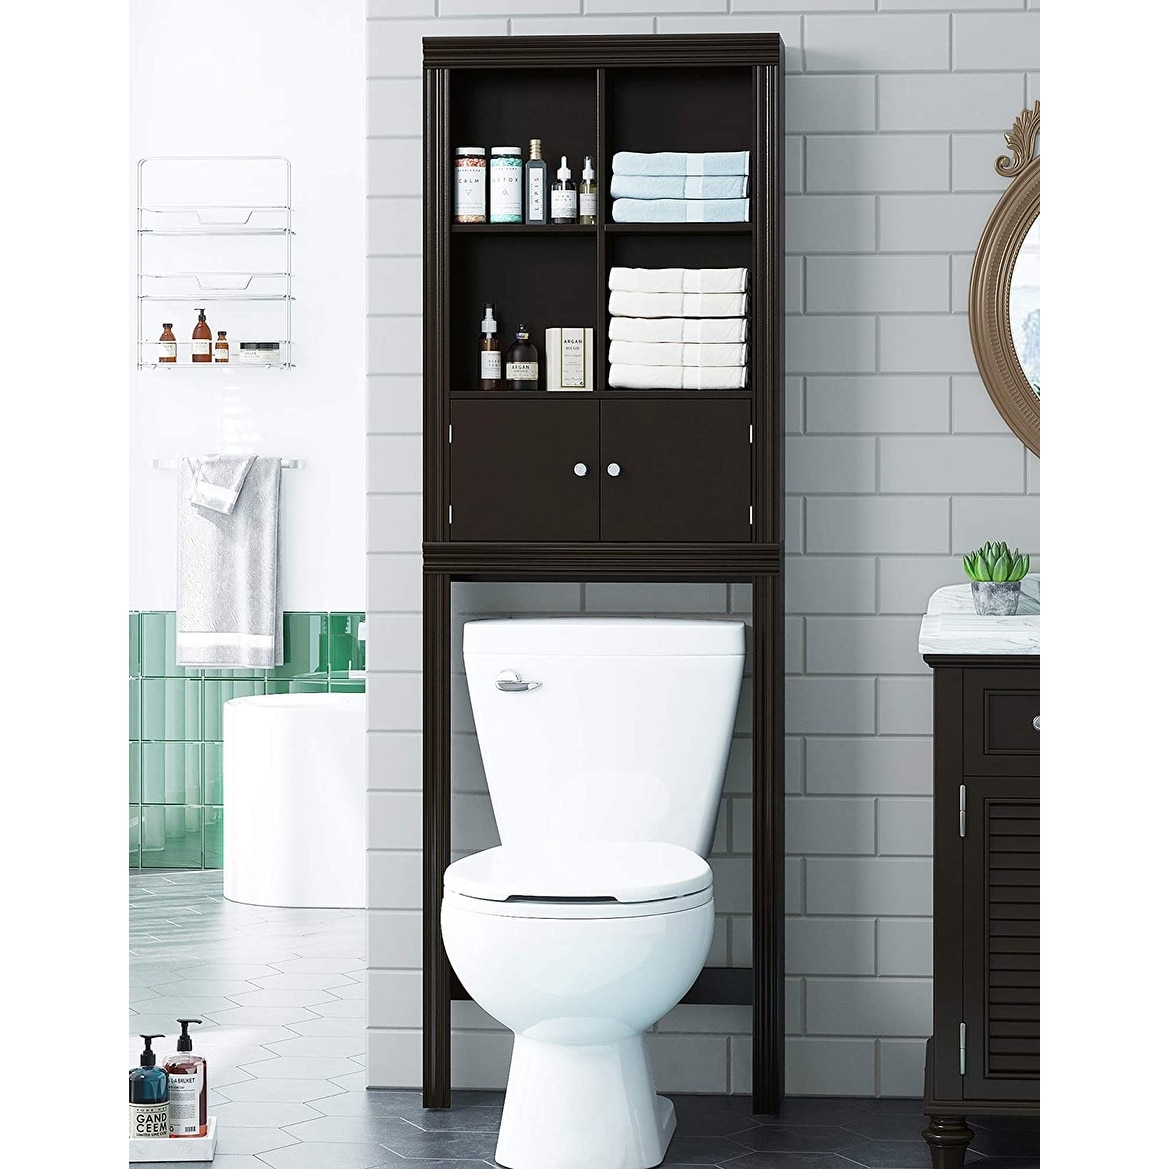 https://ak1.ostkcdn.com/images/products/is/images/direct/20d129063585f76b3ceabfd0e316845ccc49fa29/Spirich-Bathroom-Shelf-Cabinet-Storage-Over-the-Toilet-with-4-Storages-Units.jpg